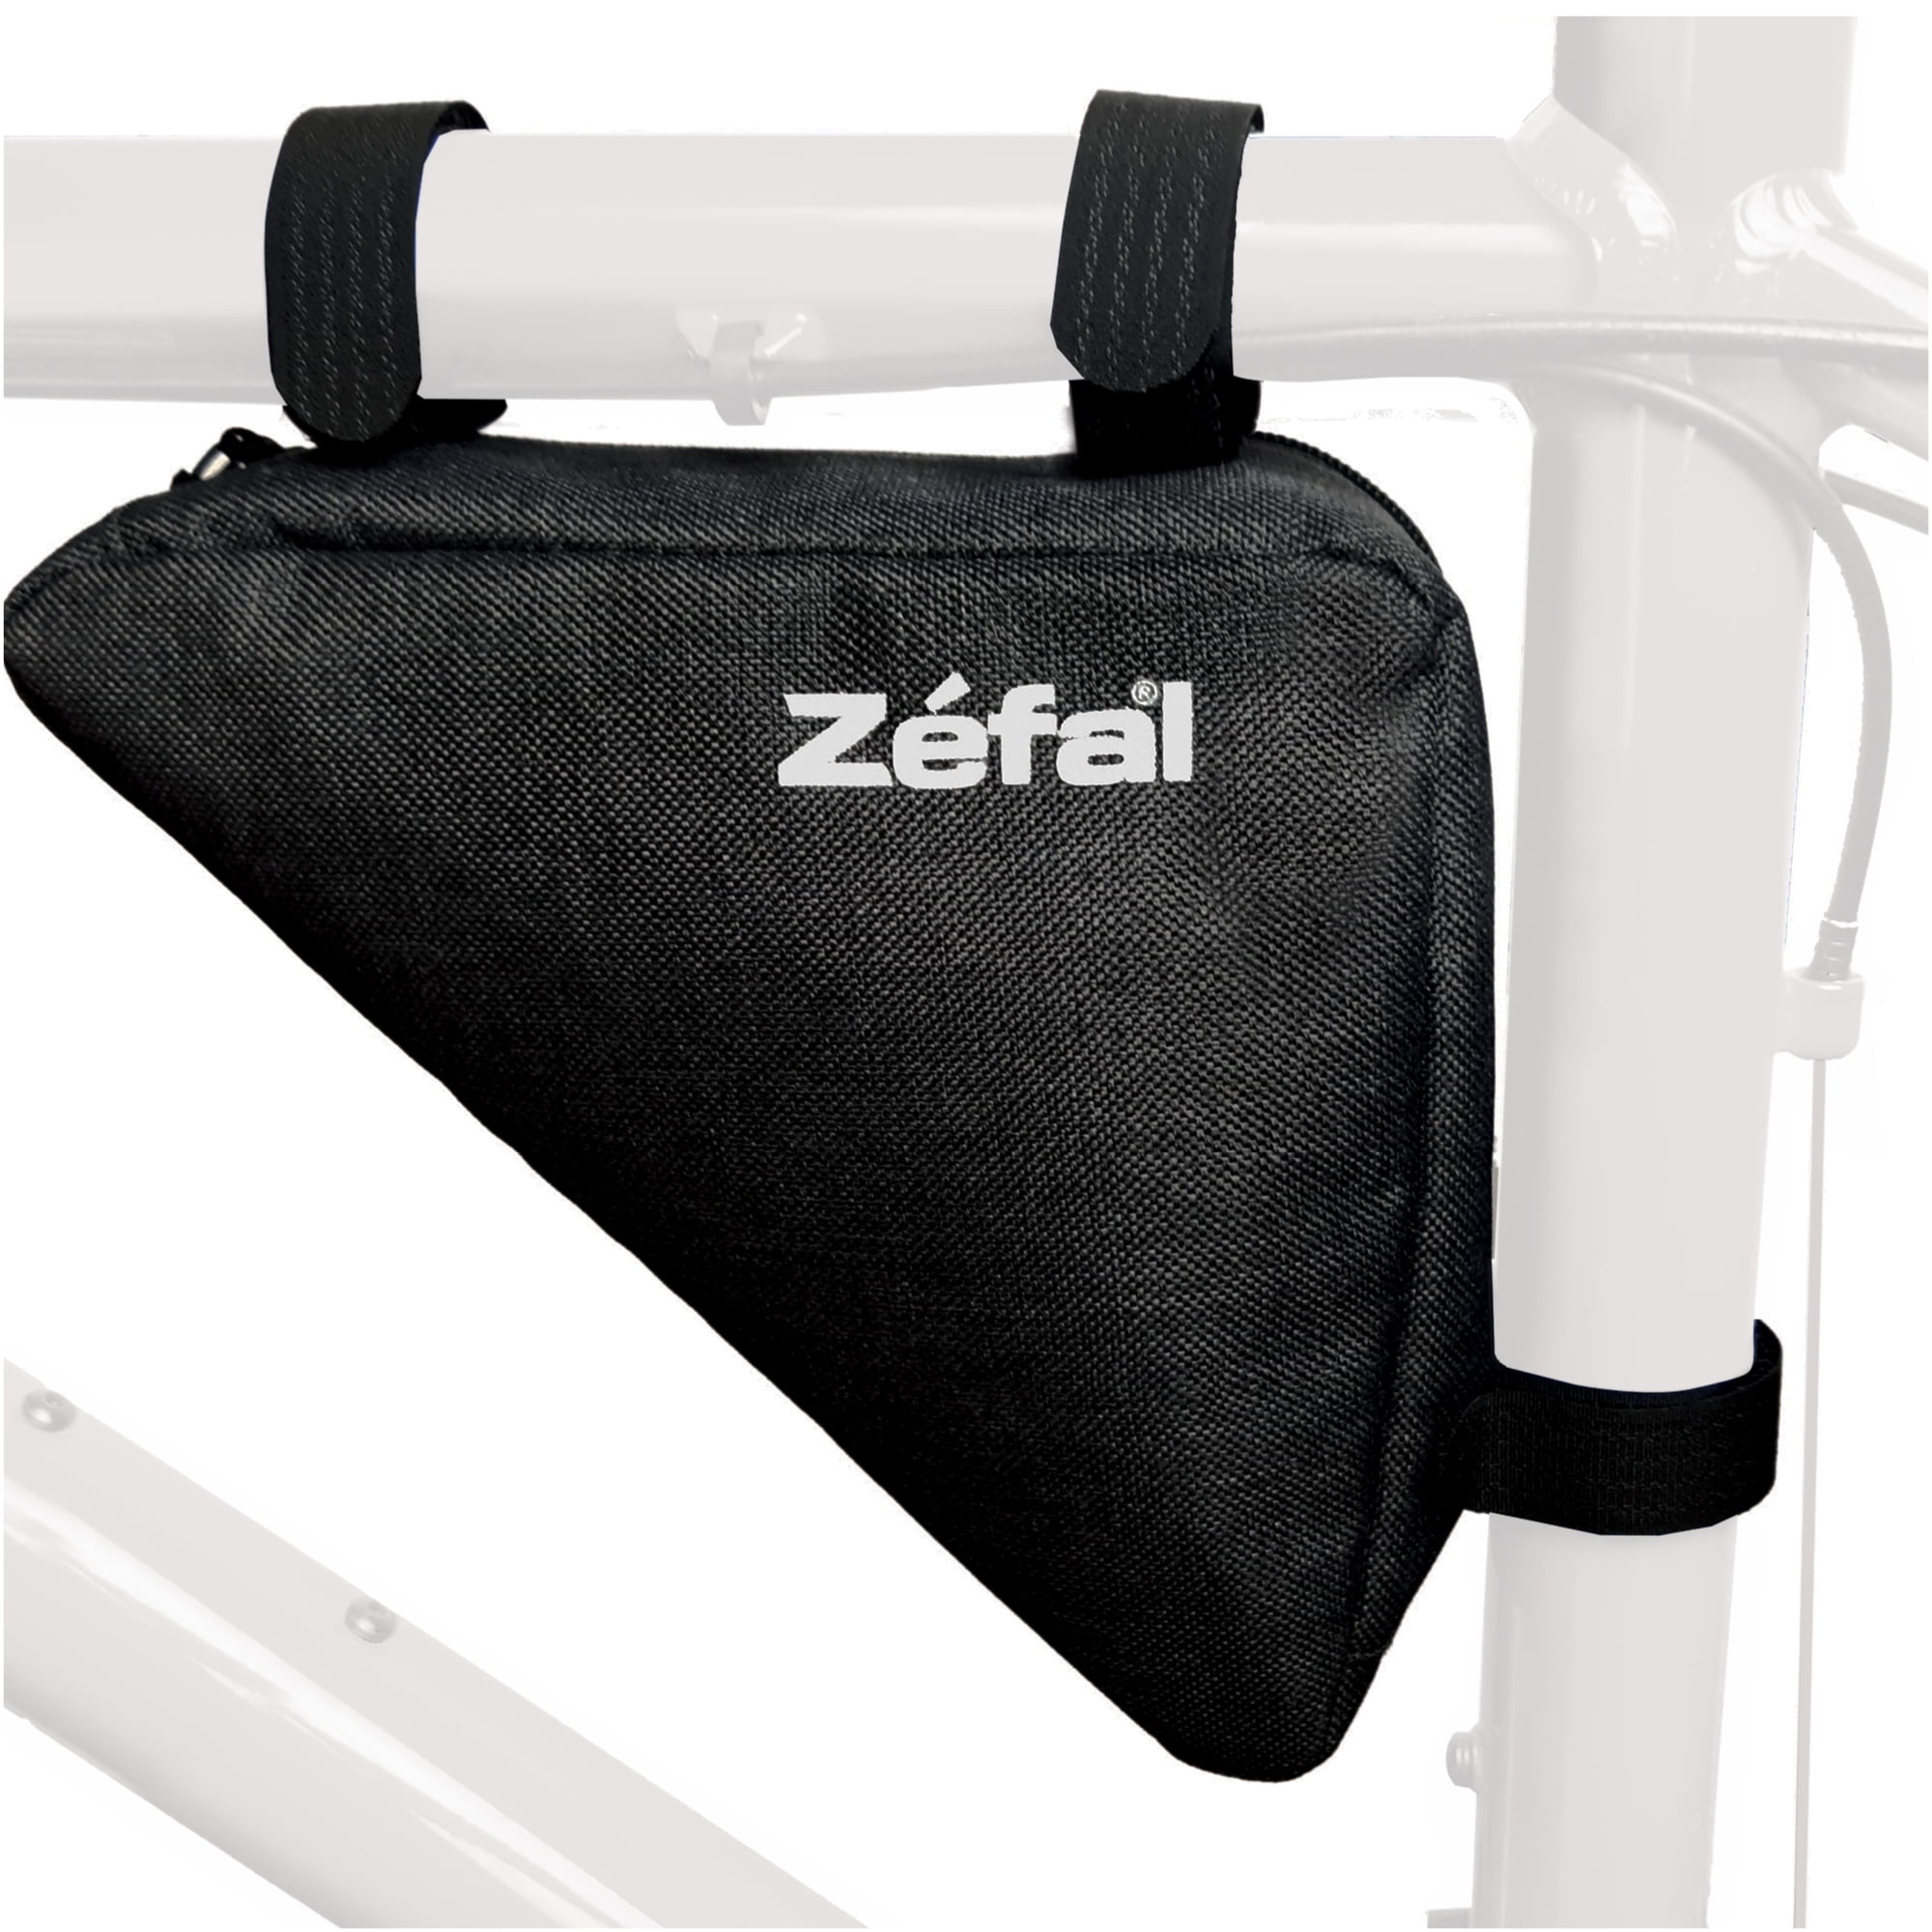 Front Top Tube Cycling Under Seat Pouch IB-FB1-M IBERA Bike Triangle Frame Bag 